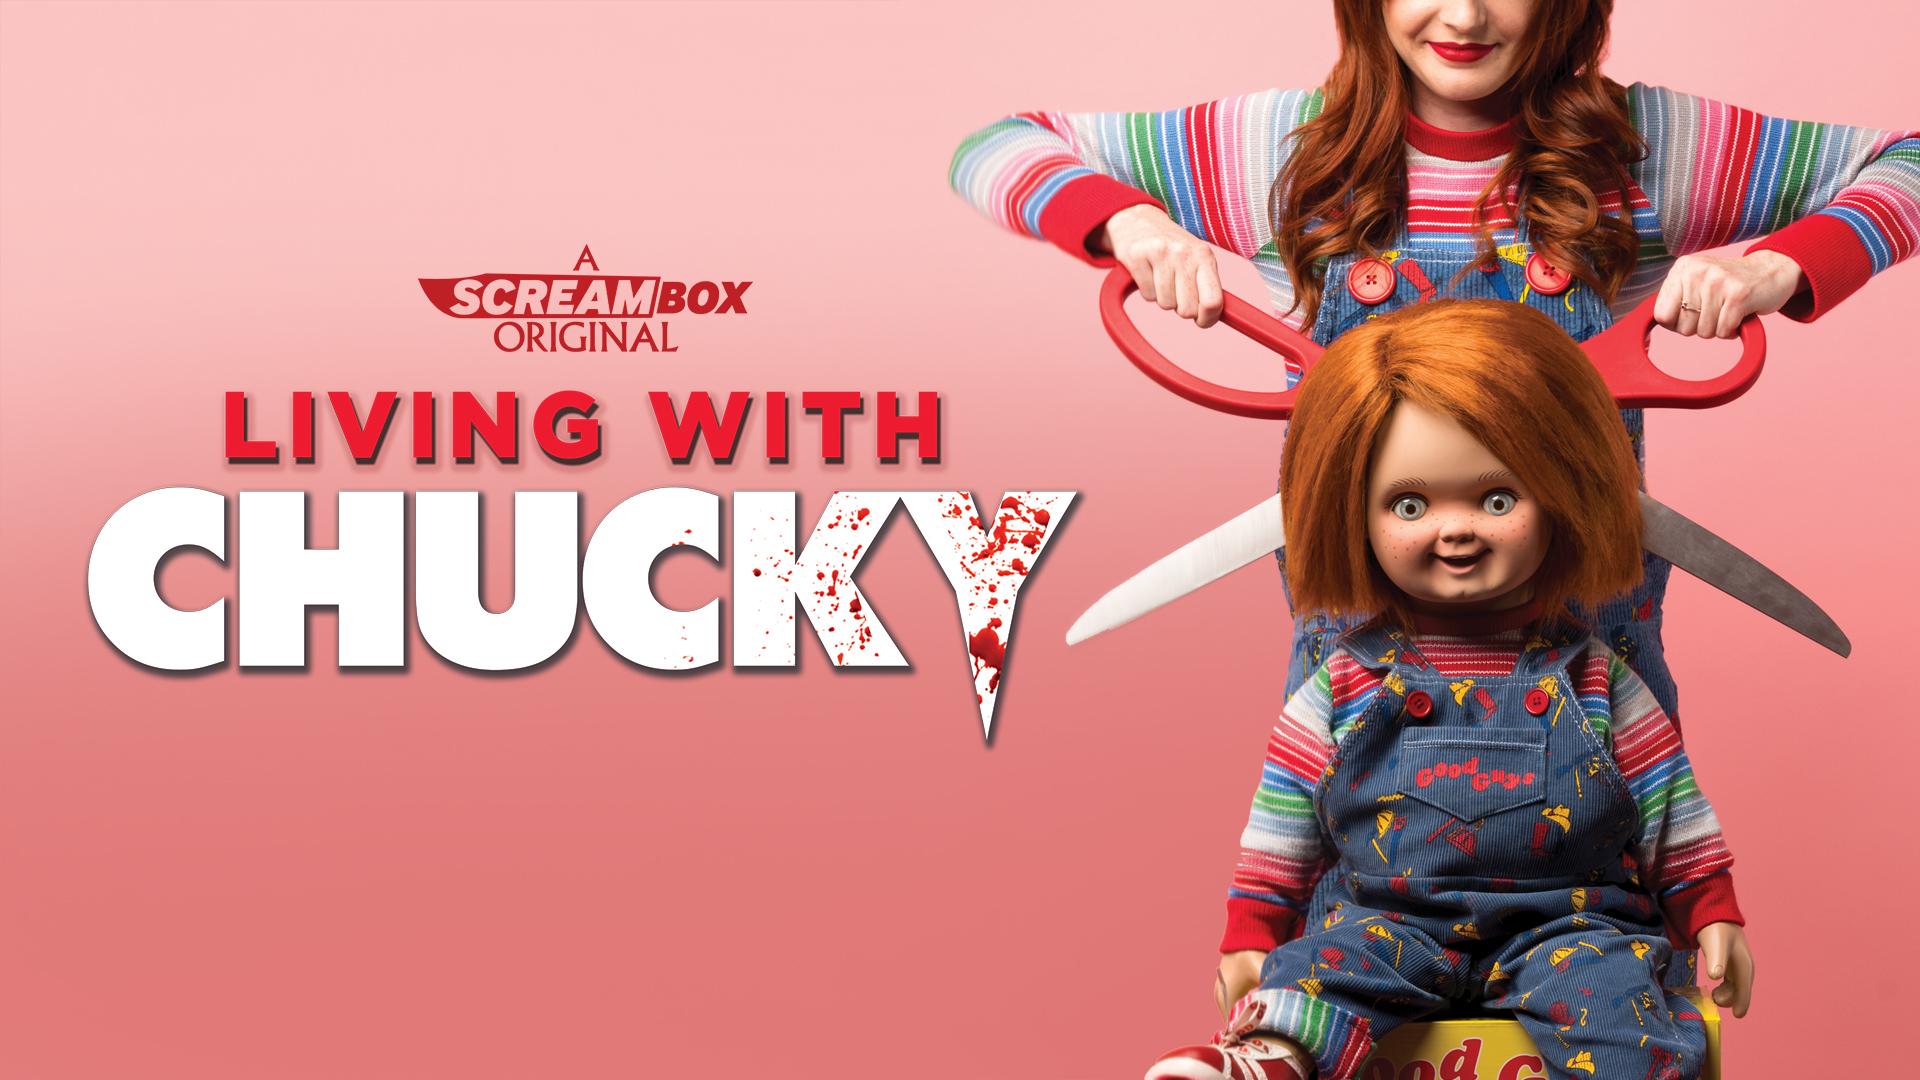 LIVING WITH CHUCKY Wants to Play on Screambox on April 4